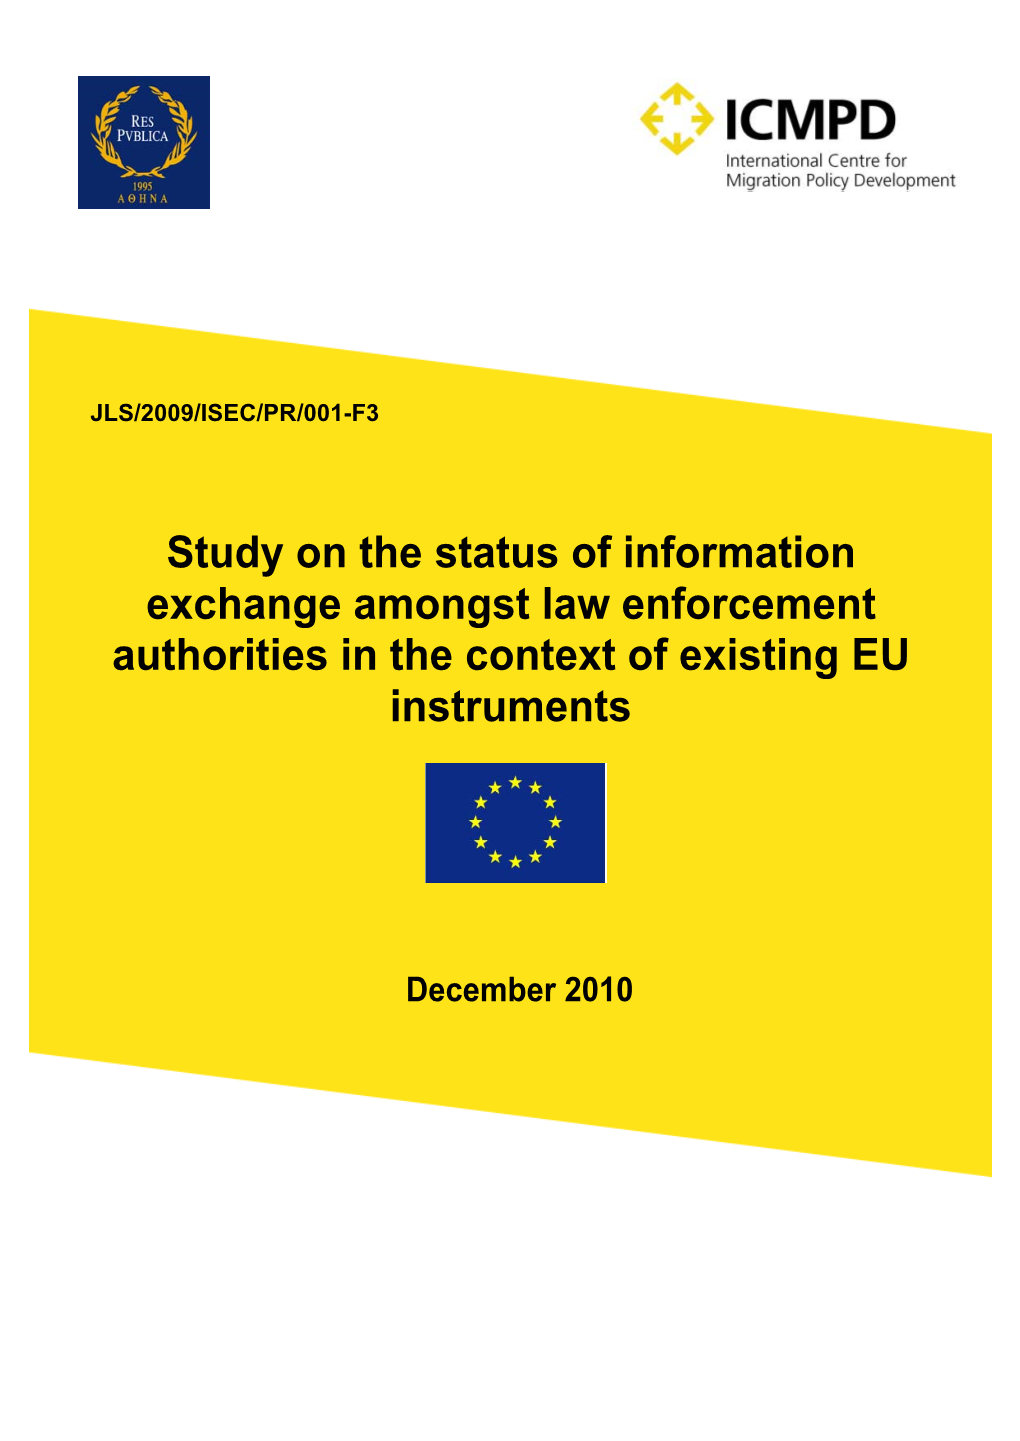 Enforcement Authorities in the Context of Existing EU Instruments